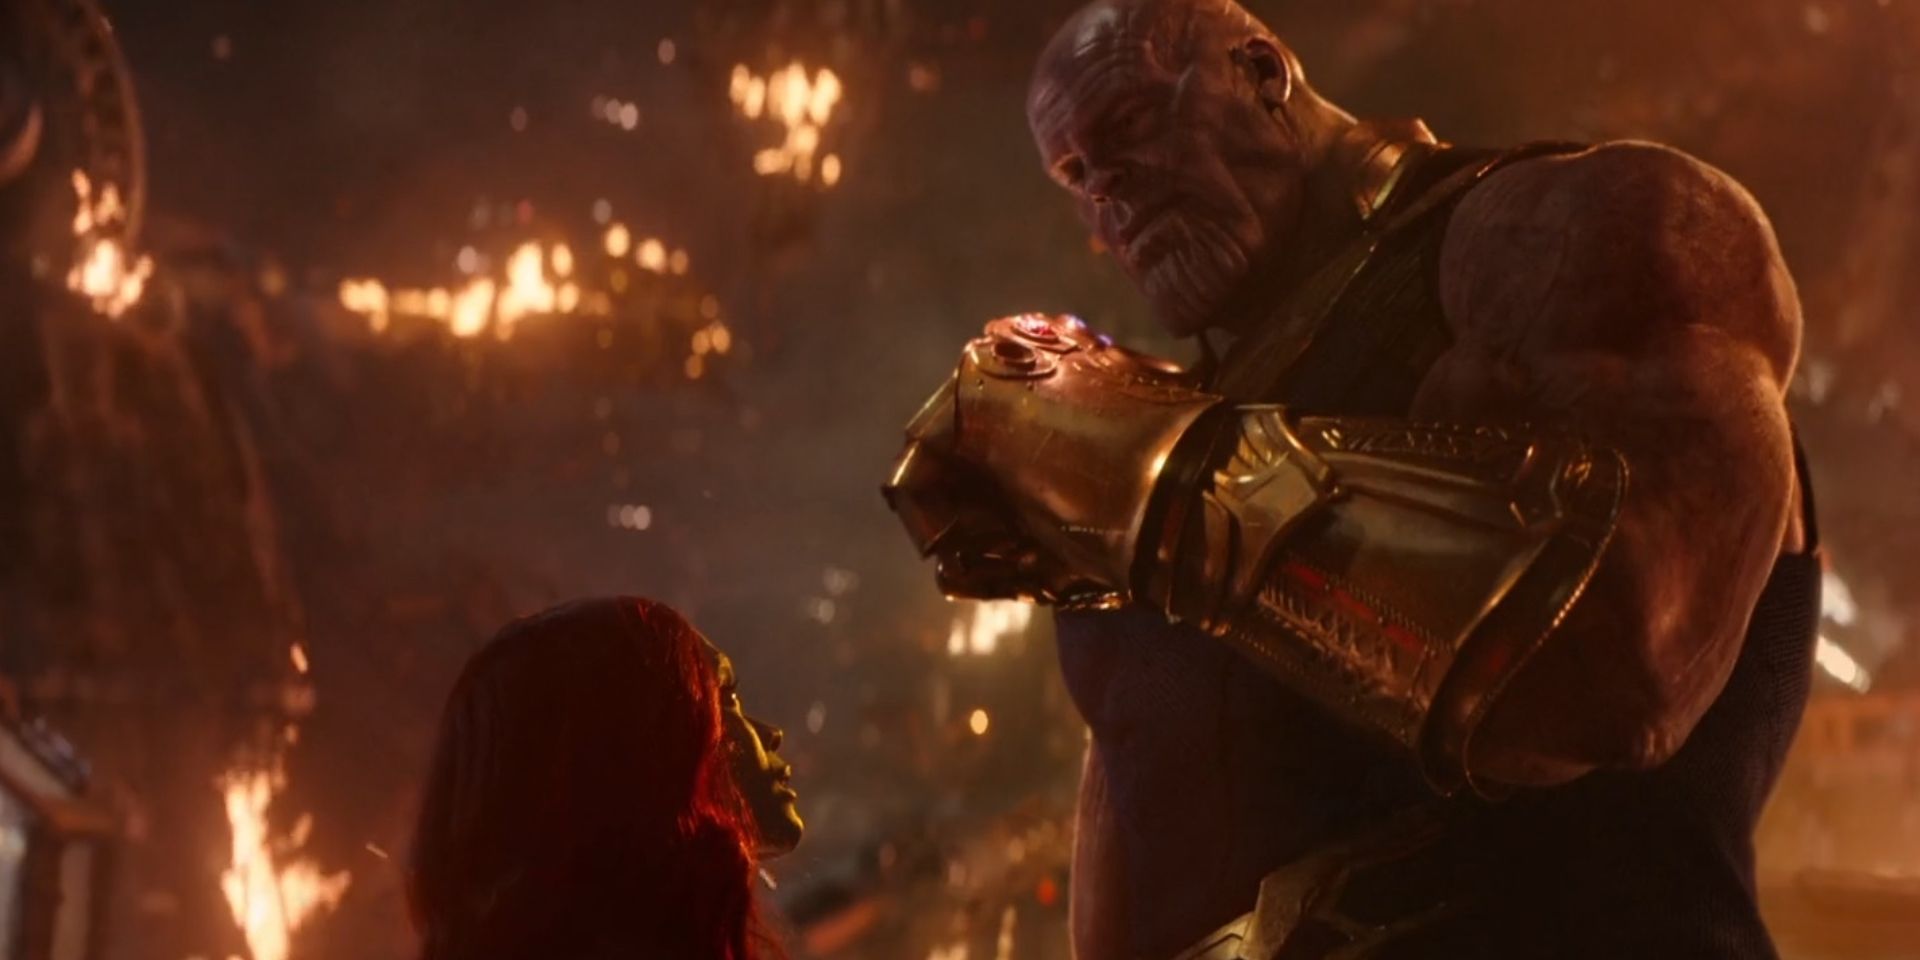 20 Best Thanos Quotes From The MCU